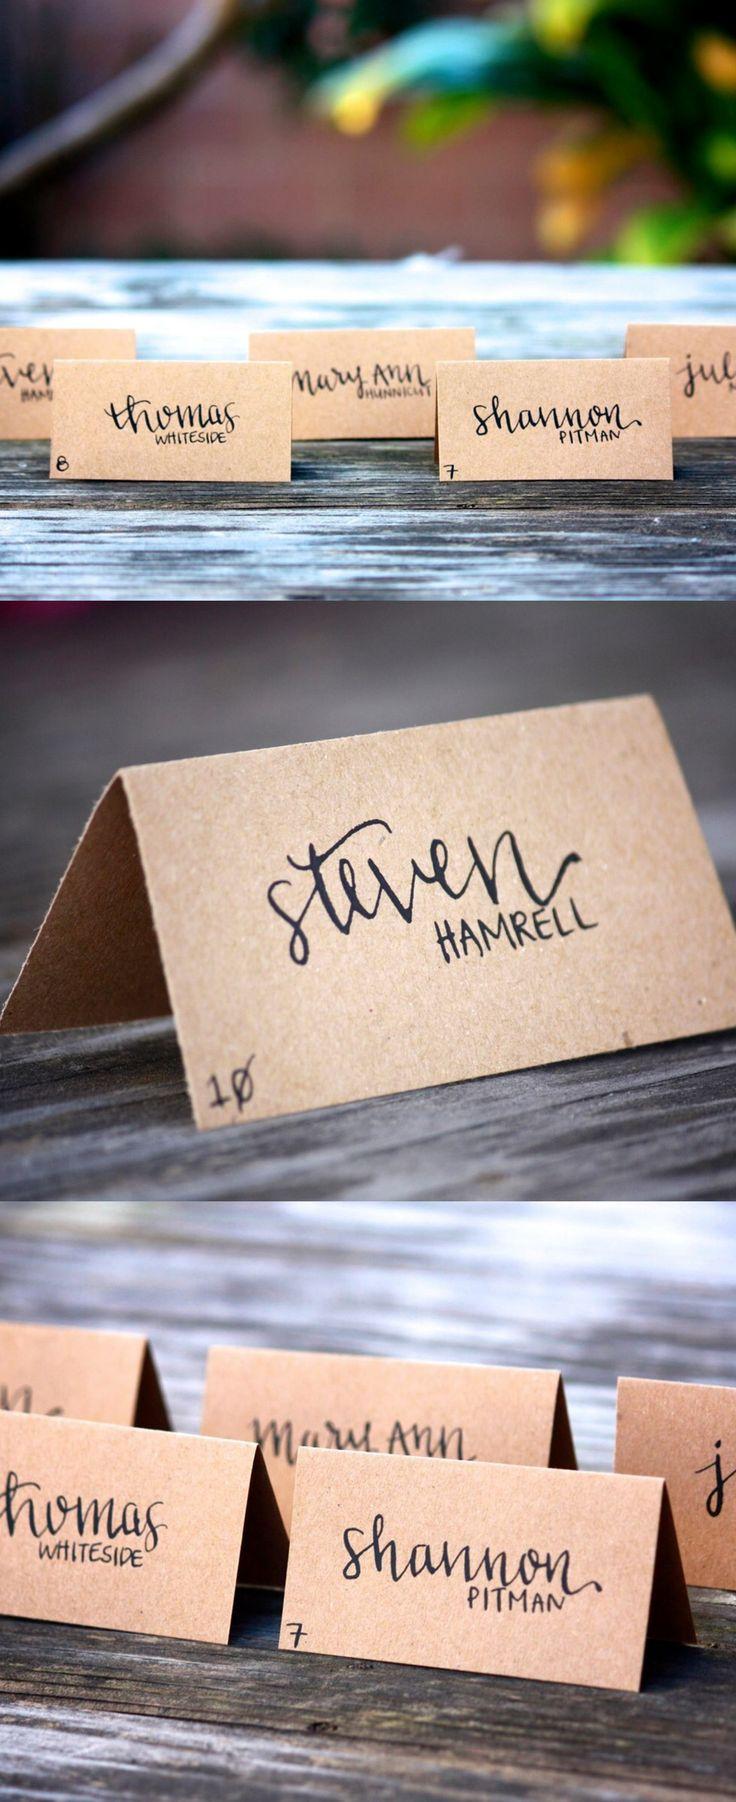 Mariage - Wedding Place Cards - Tent Fold - Escort Card - Black Calligraphy With Kraft Paper - Dinner Party - Name Tag